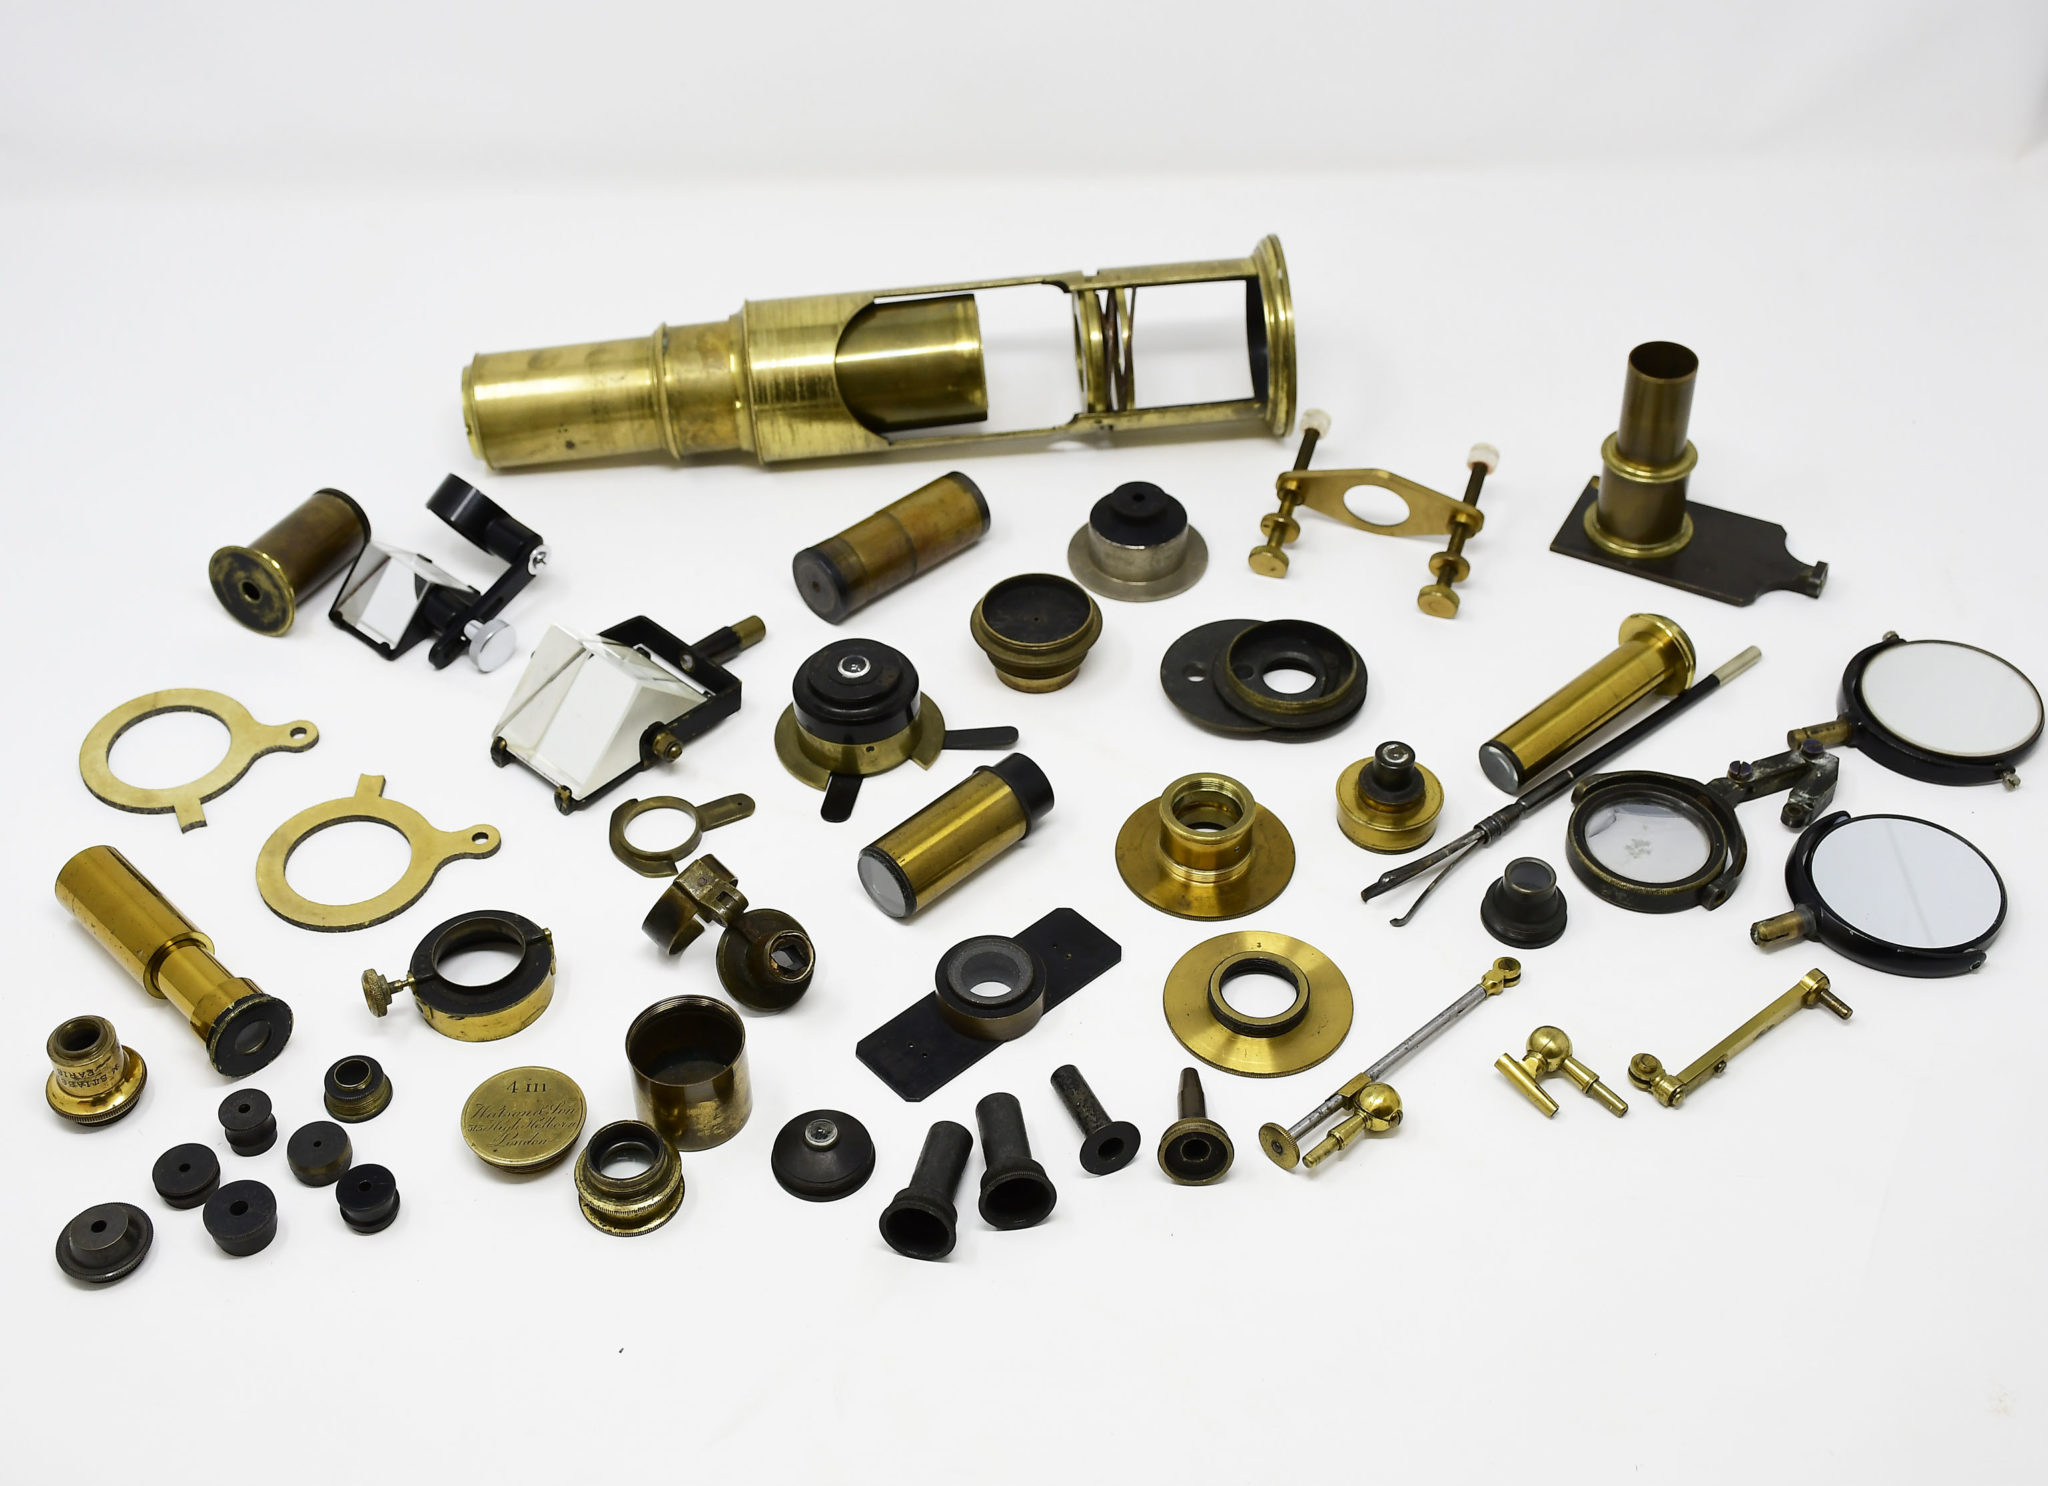 Lot 19th-century microscope parts and accessories